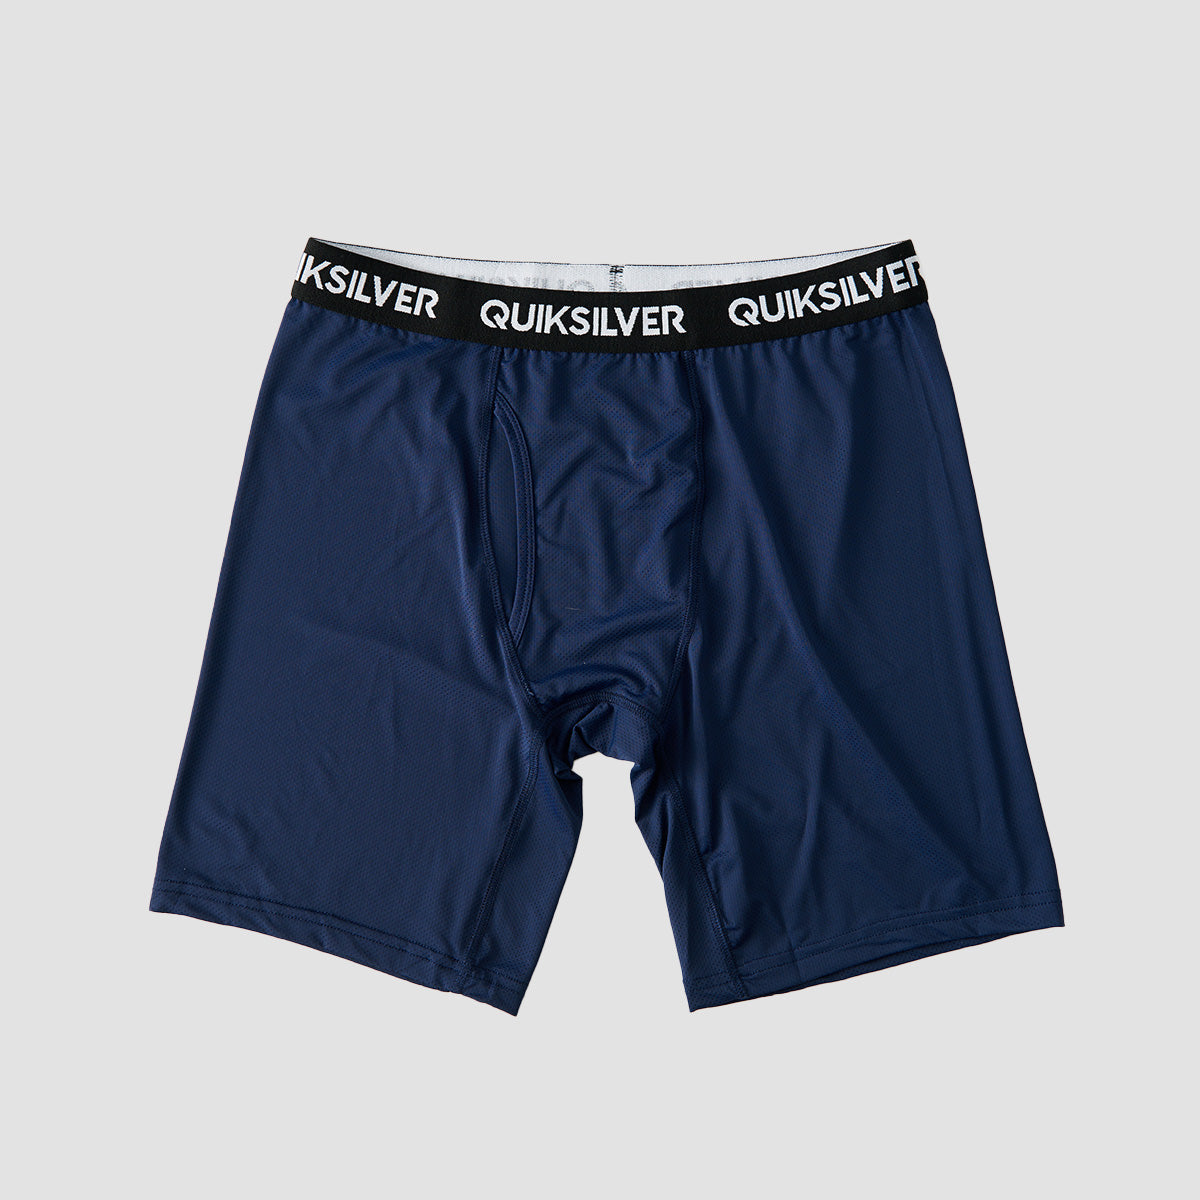 Quiksilver Performance Boxer Shorts 2 Pack Naval Accademy